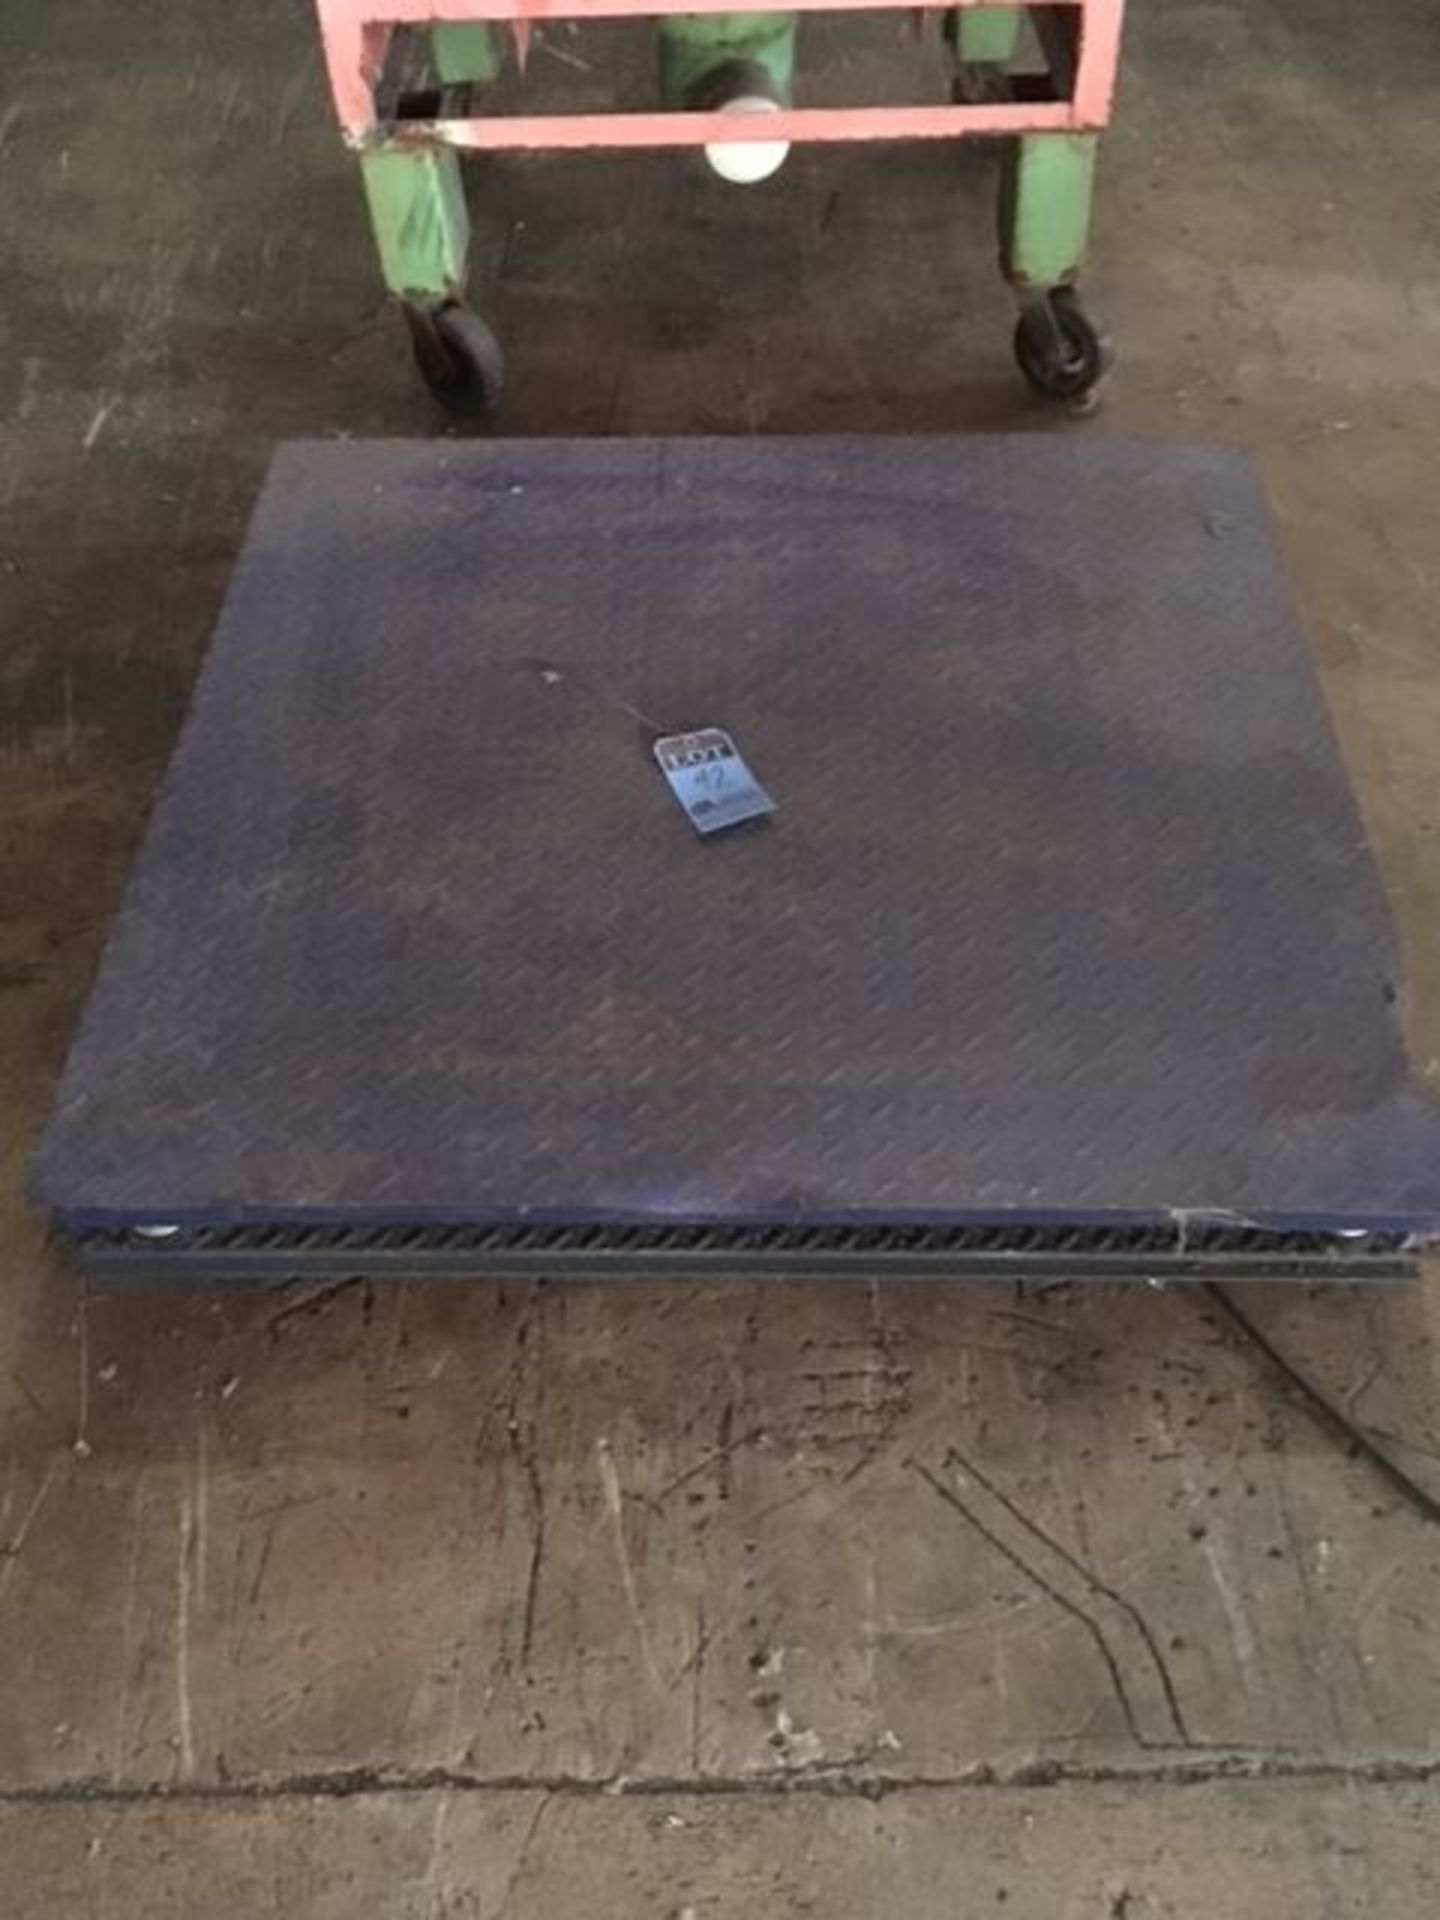 47" X 47" SCALE BASE ONLY; MISSING CONTROLS & MISSING READOUT